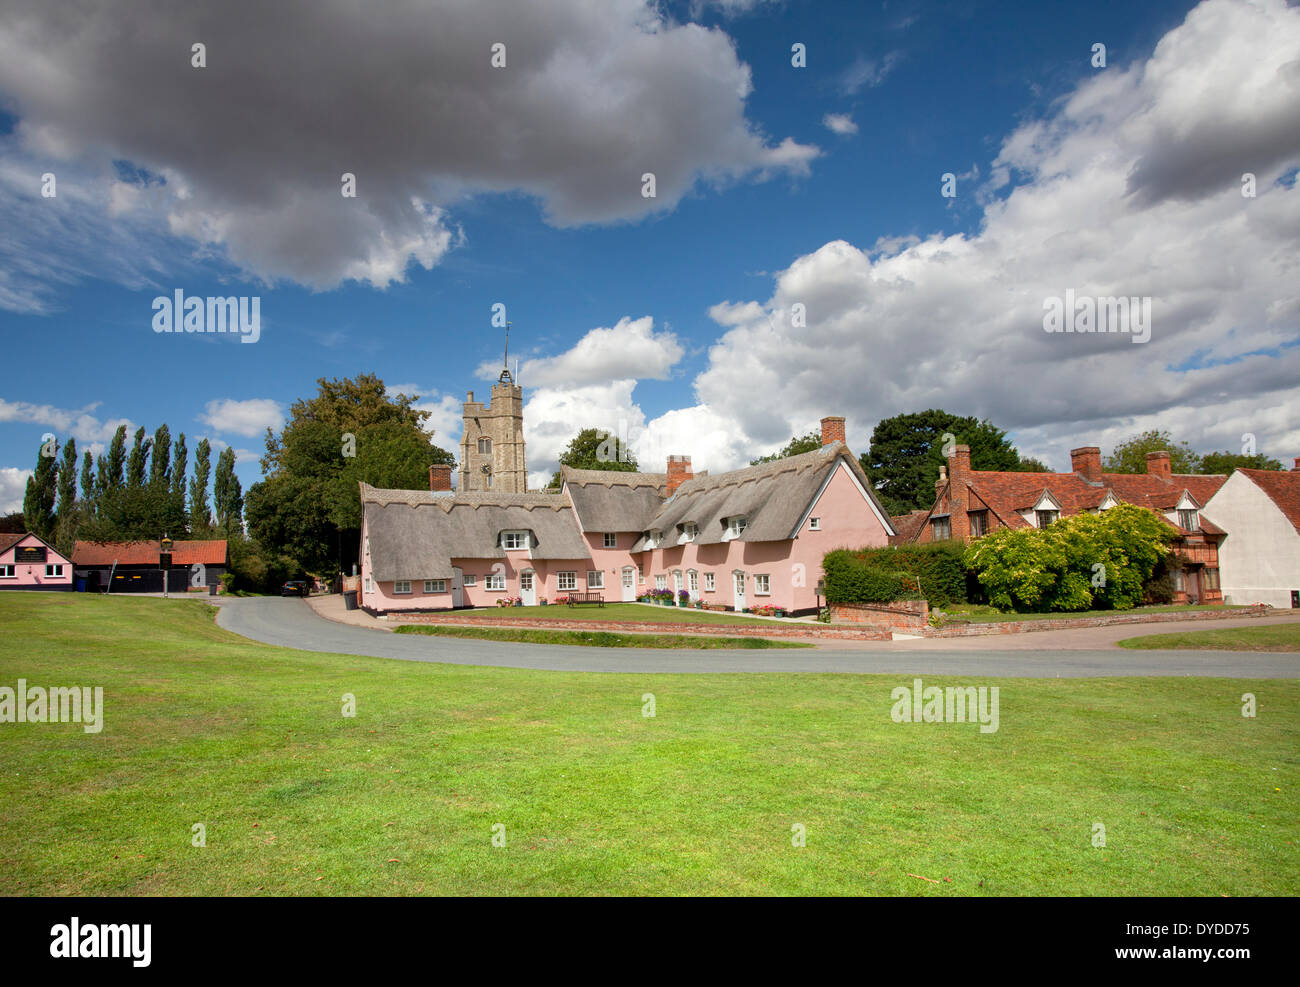 The picturesque village of Cavendish in Suffolk. Stock Photo